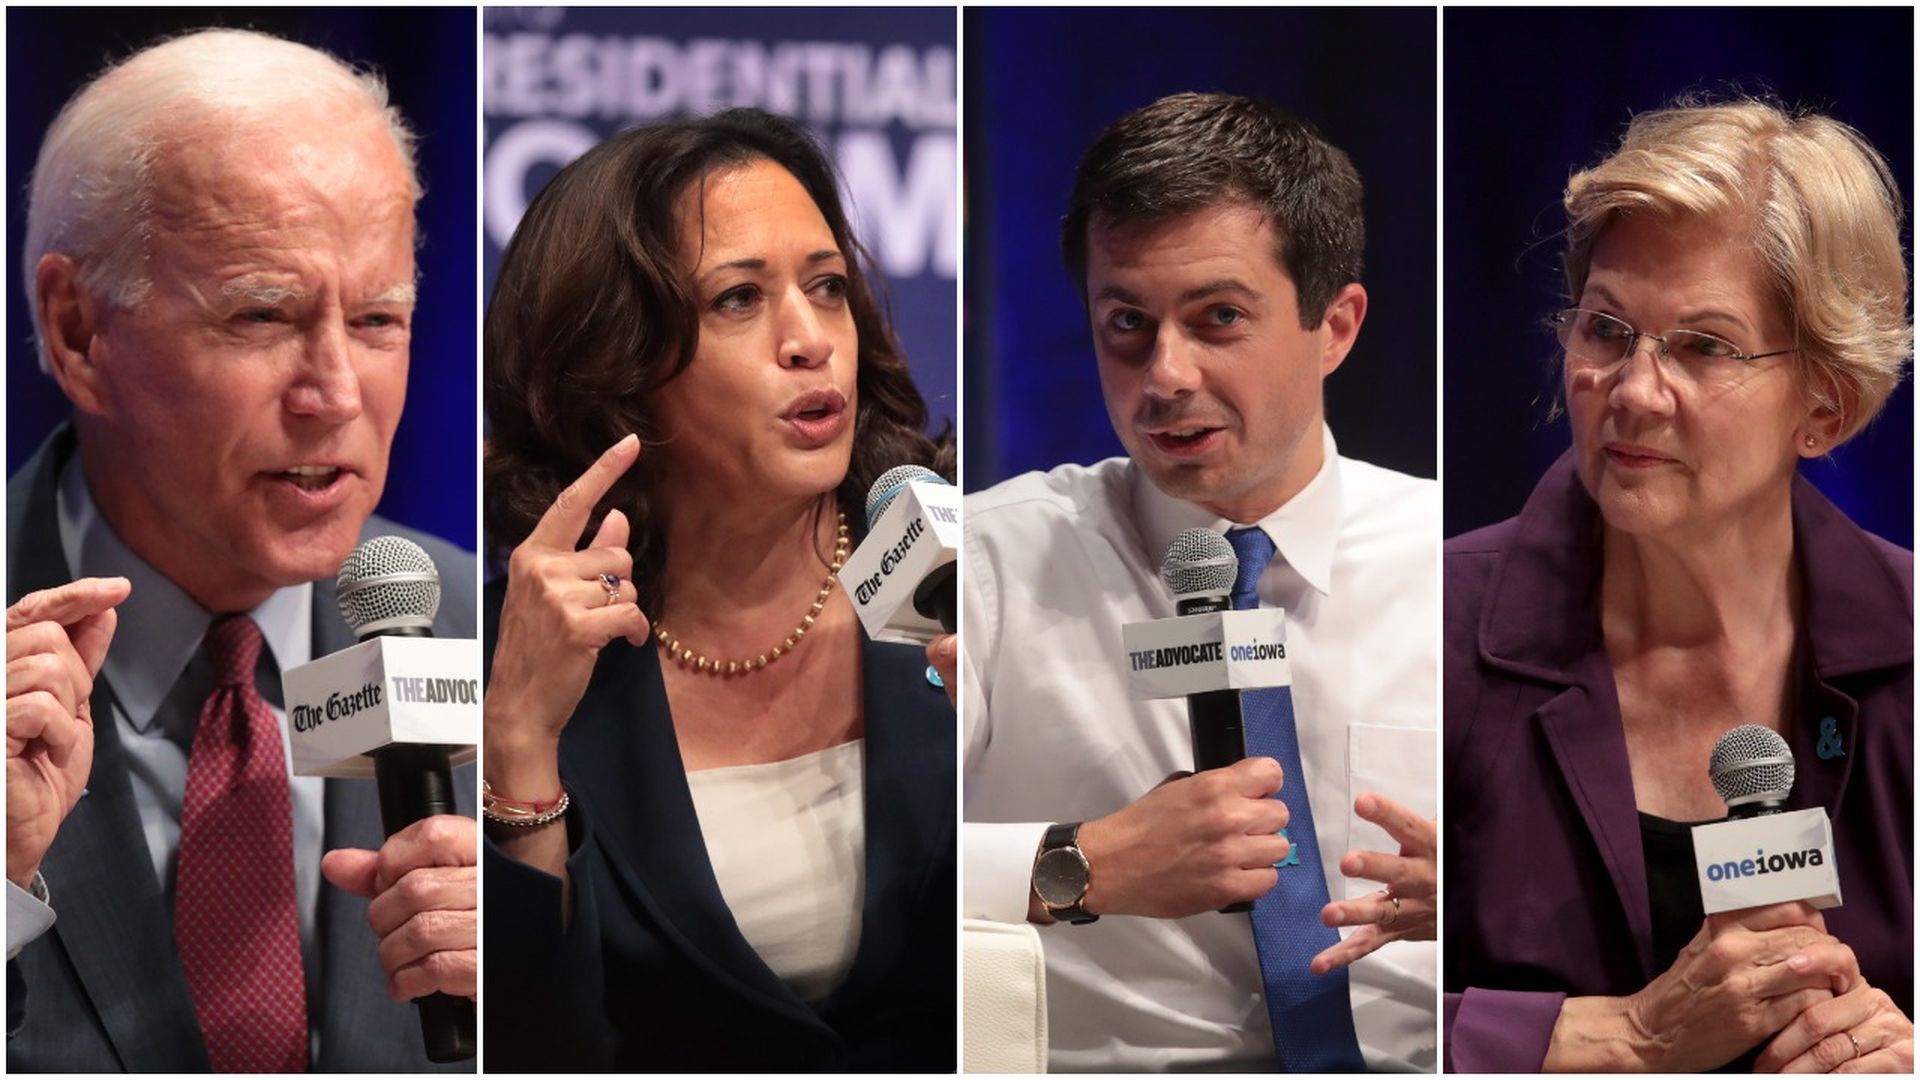 This image is a four-way split screen between Biden, Kamala, Pete, and Warren. They are all speaking into microphones.